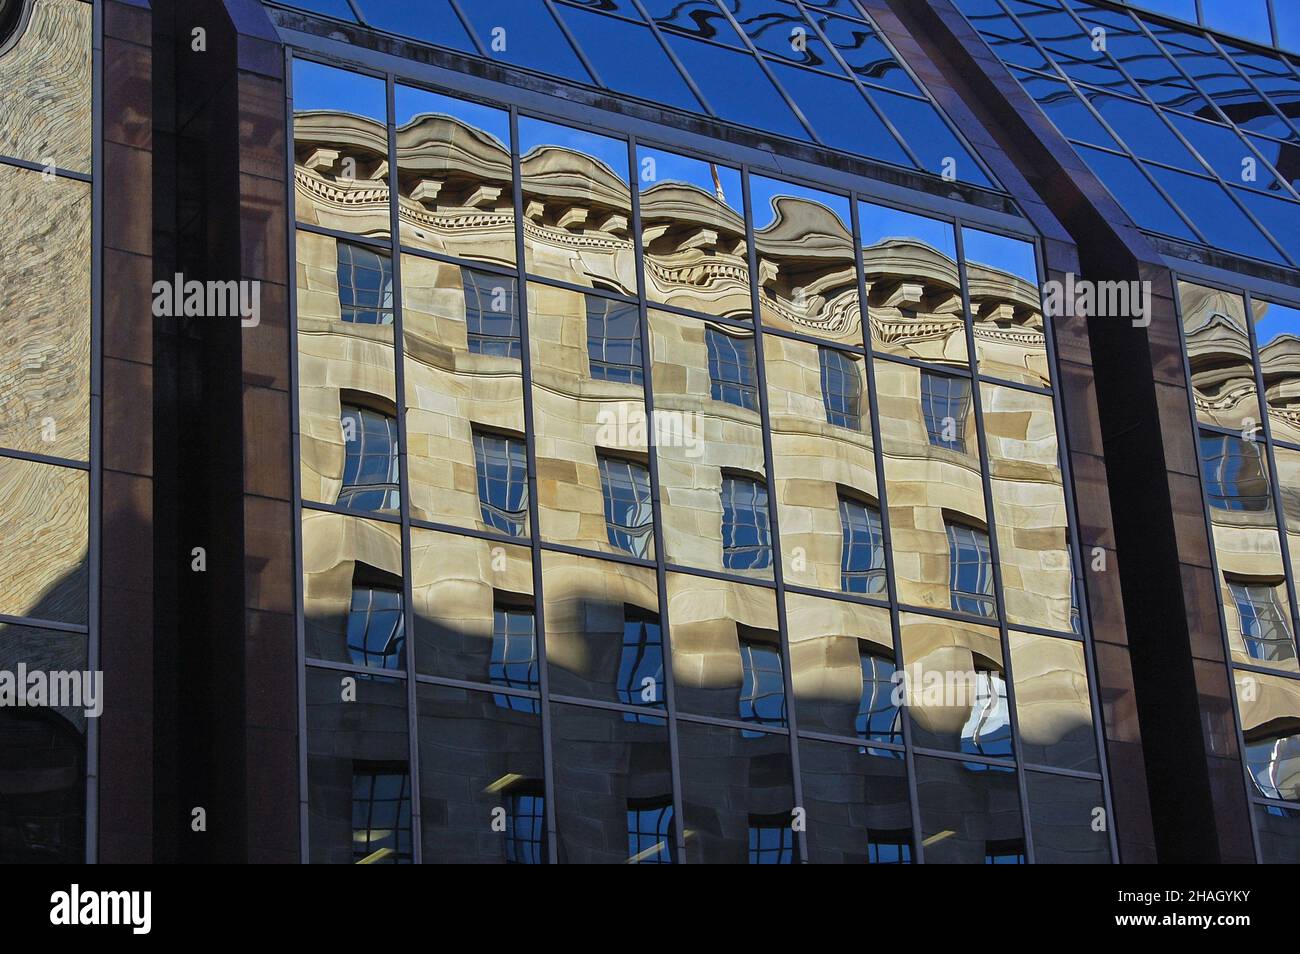 Reflection of office building in window. St.Vincent Street, Glasgow, Scotland, United Kingdom, Europe. Stock Photo